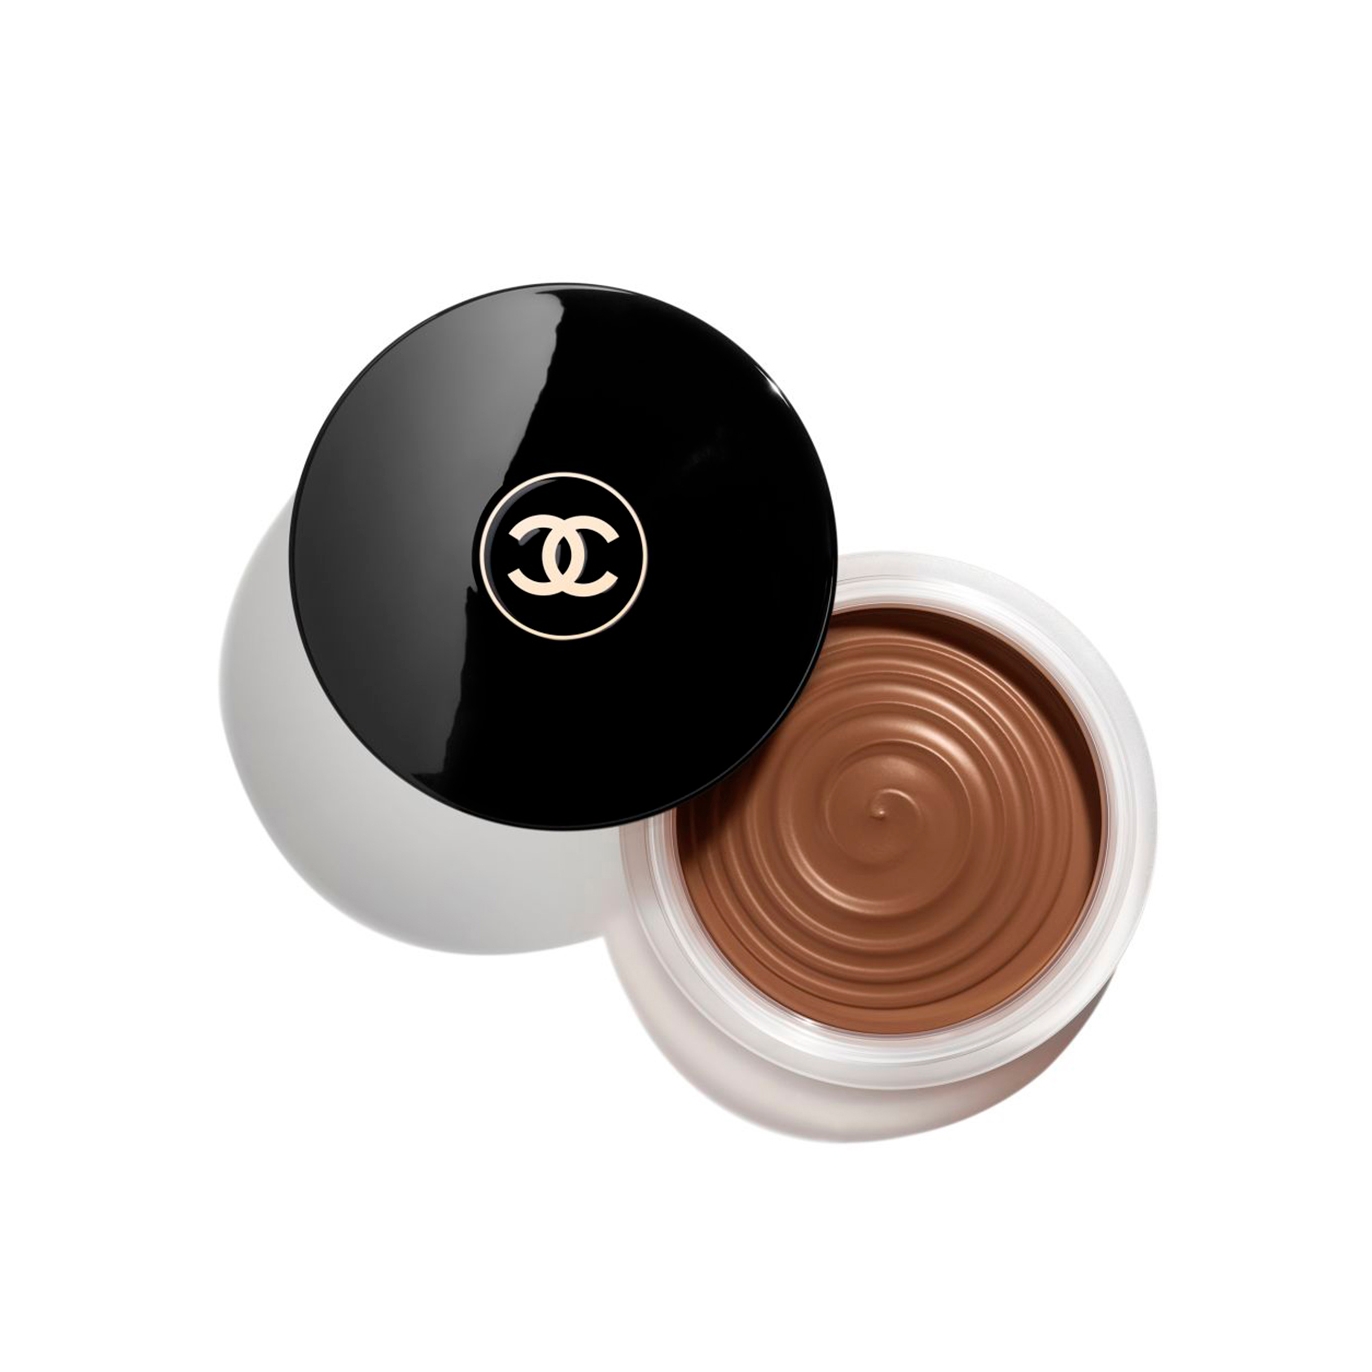 An Honest Review of Chanel Les Beiges Water Fresh Complexion